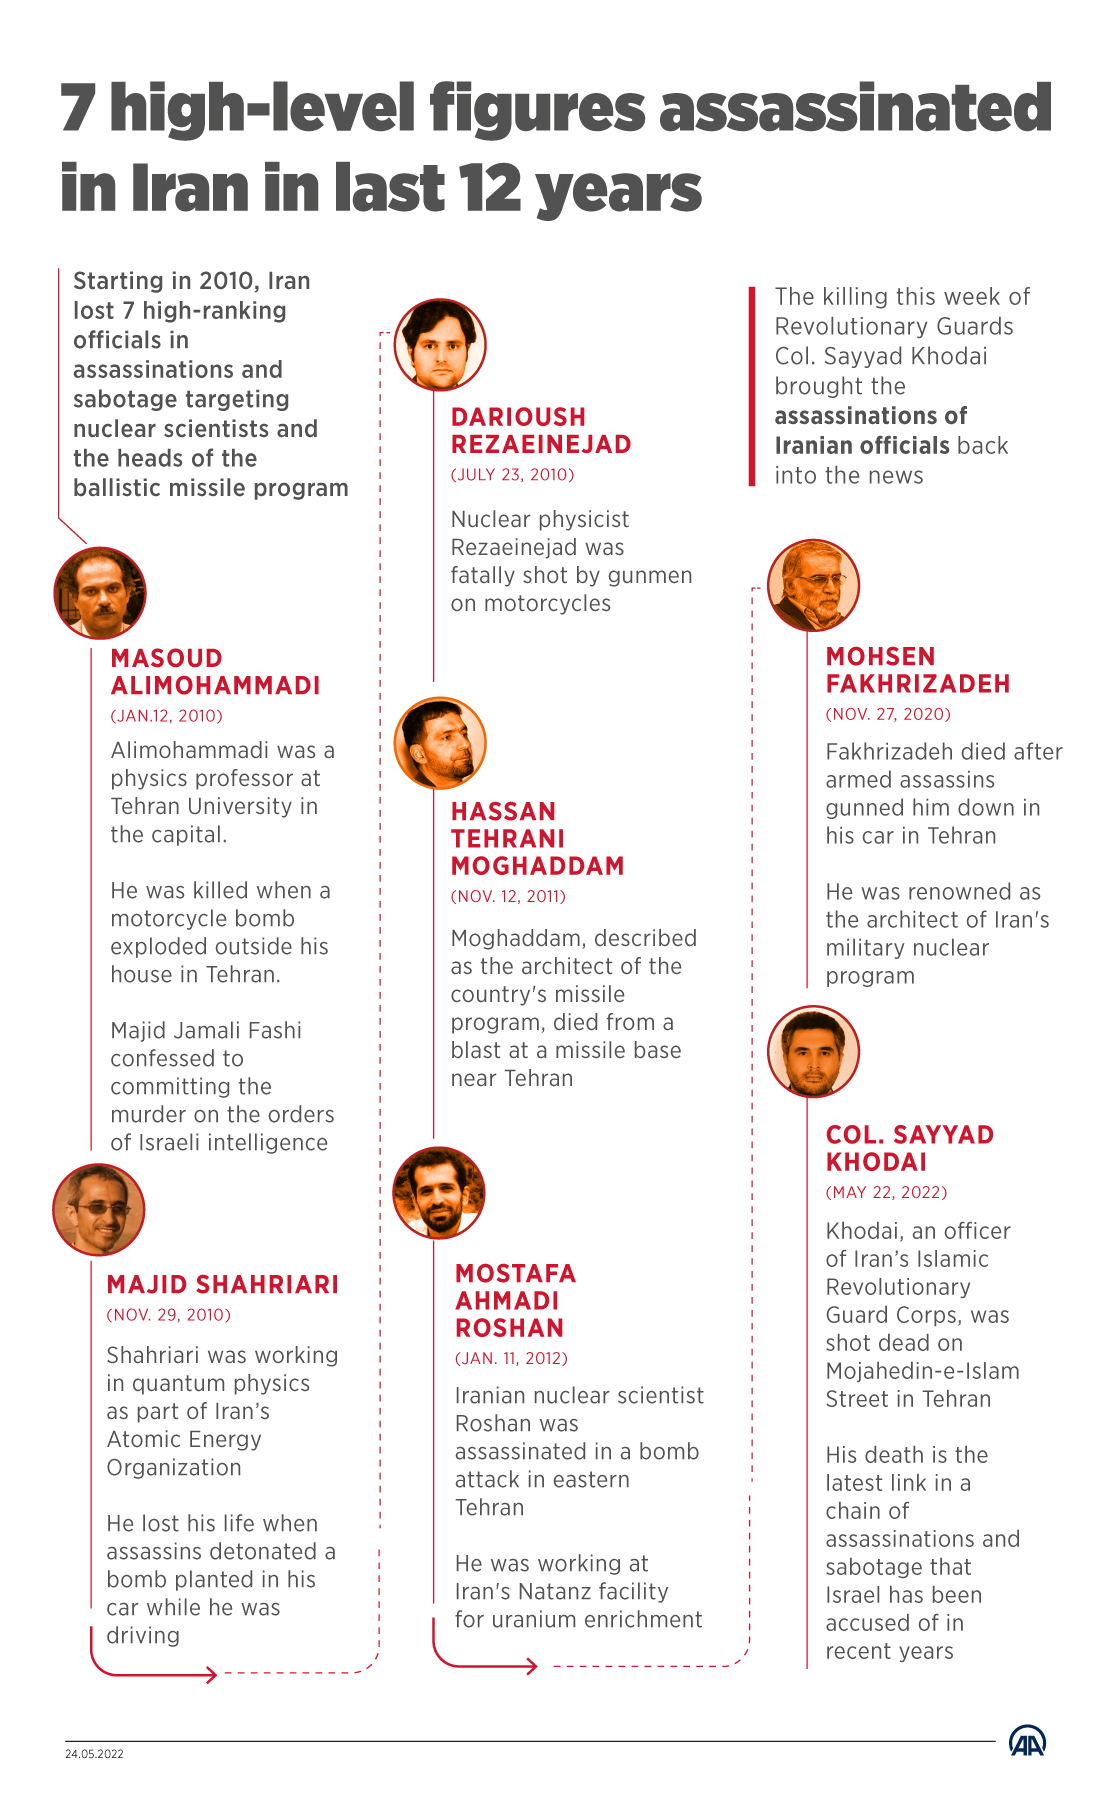 7 high-level figures assassinated in Iran in last 12 years